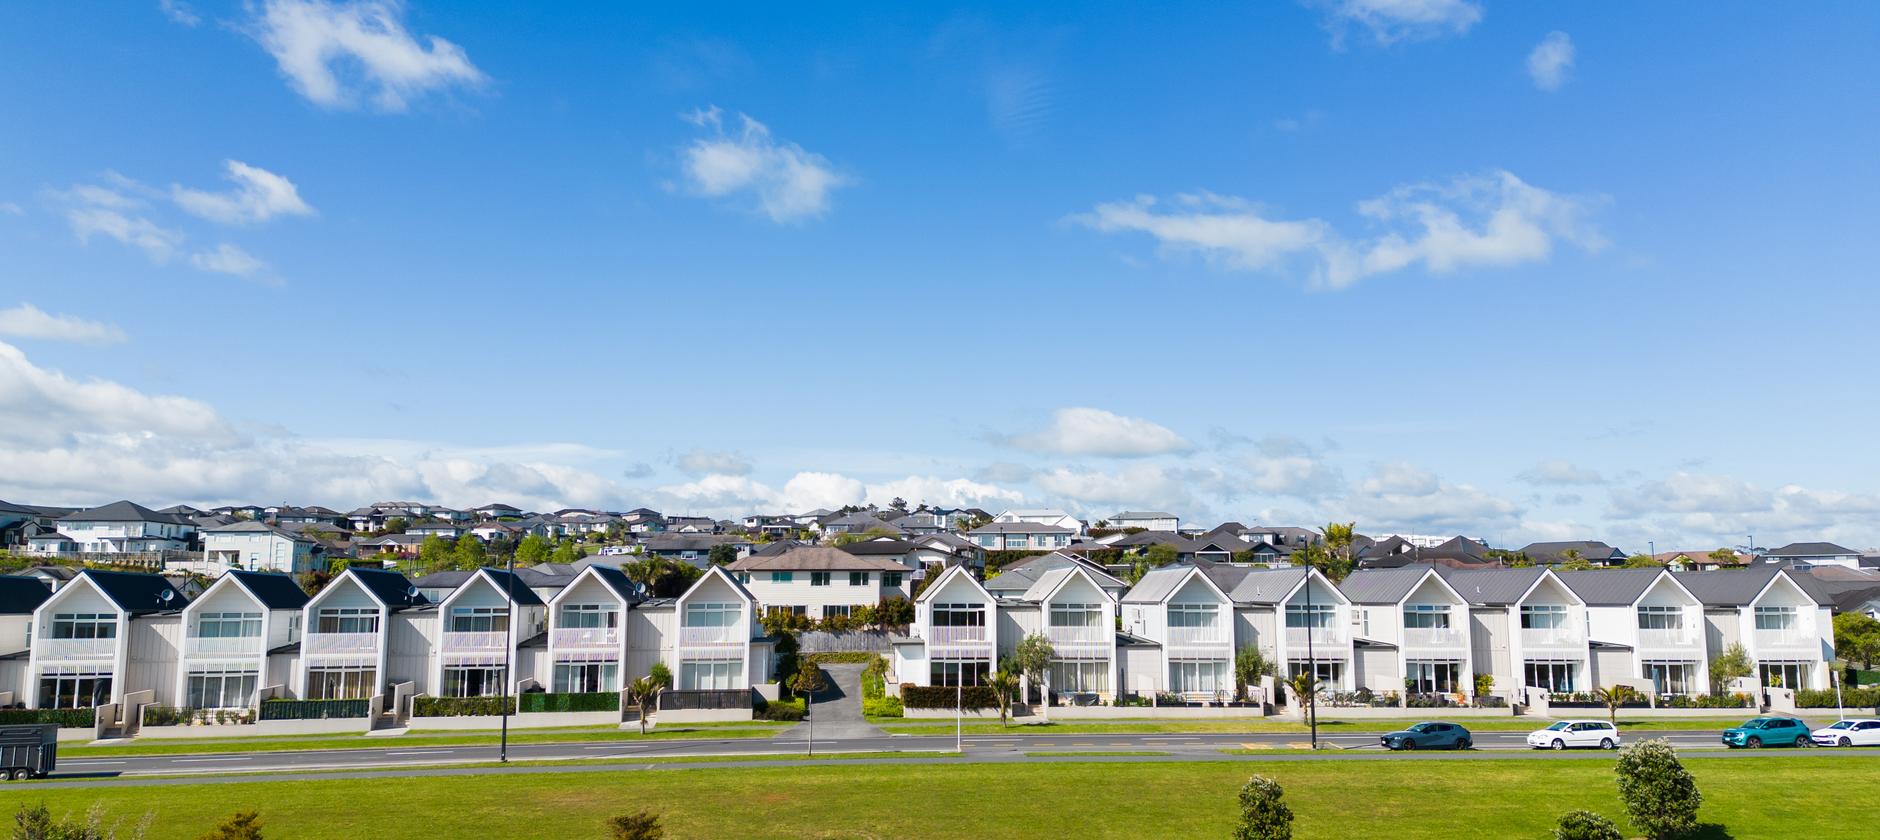 NZ first home buyers find silver lining amid housing downturn